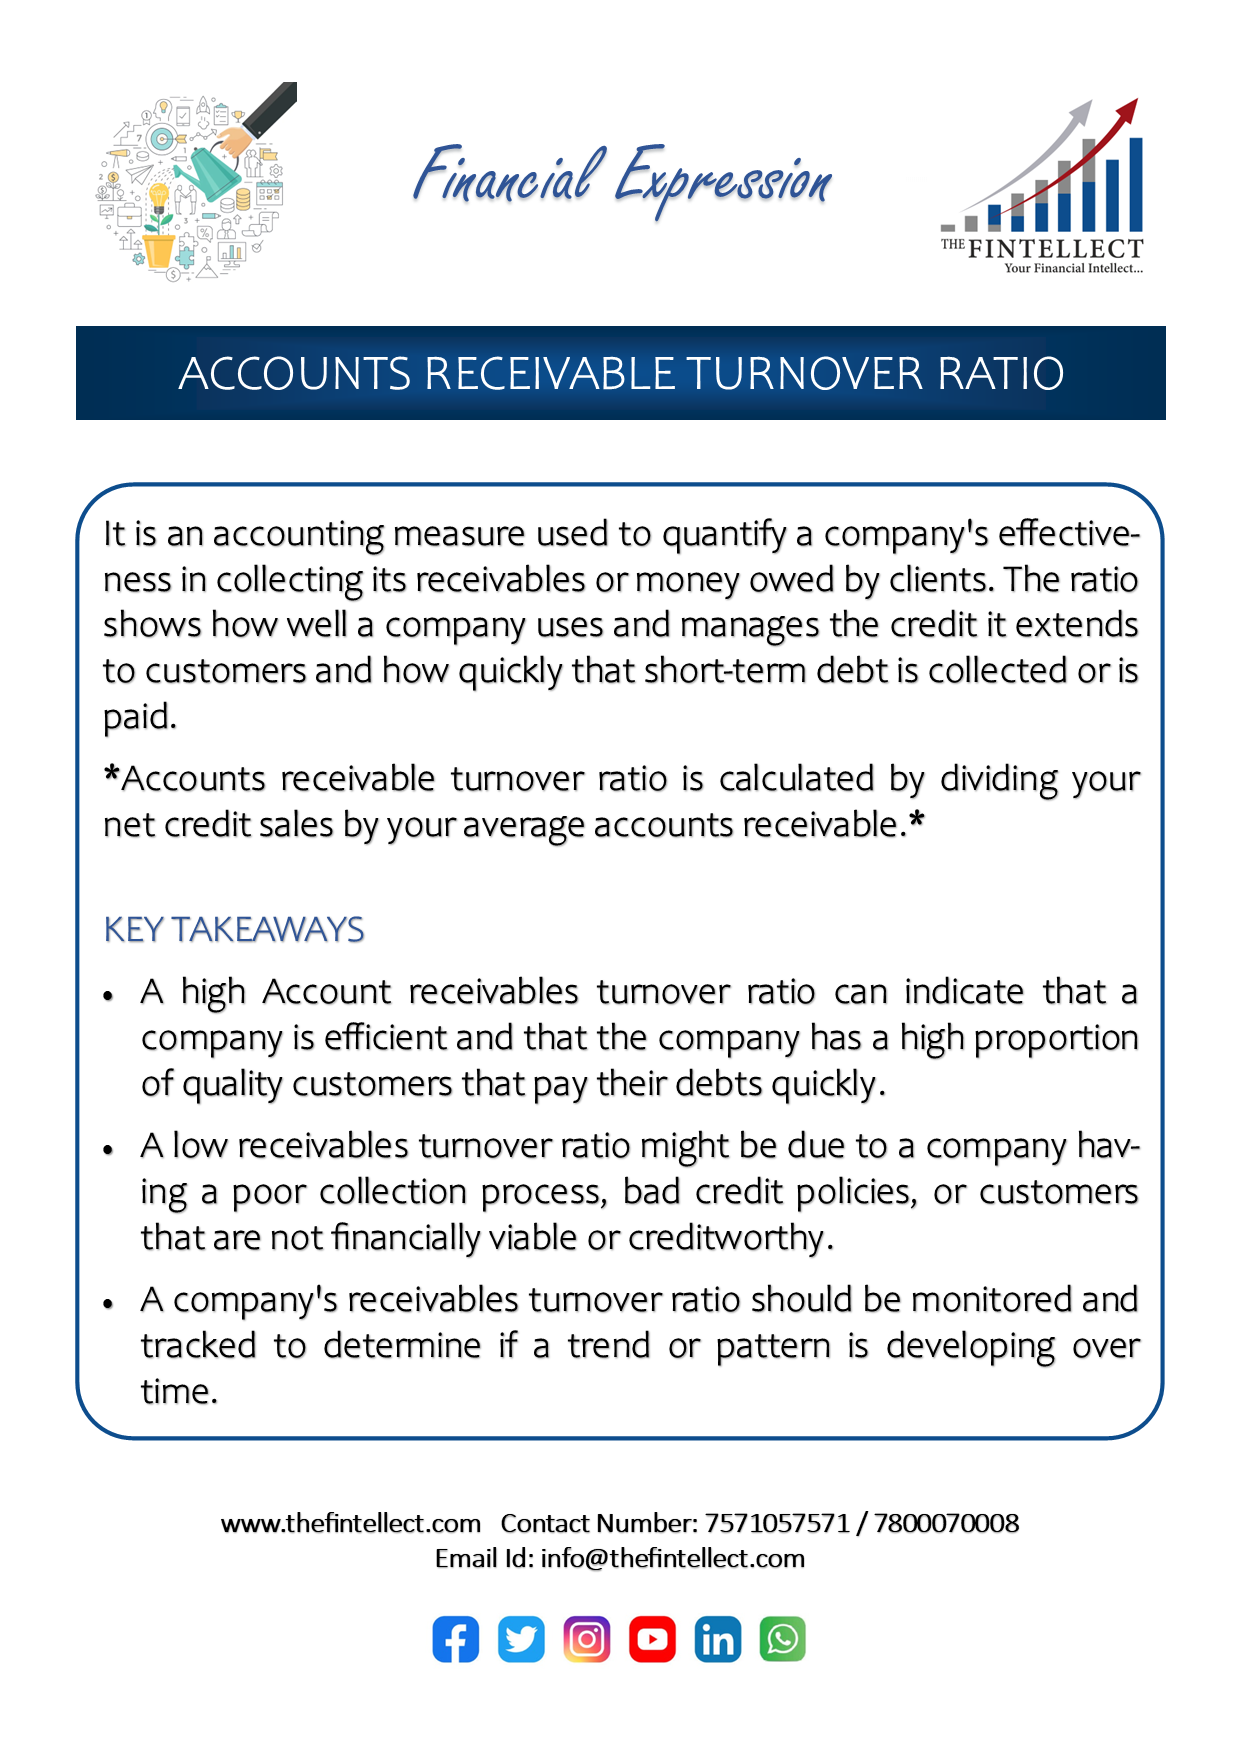 7040503_ACCOUNTS RECEIVABLE TURNOVER RATIO.png